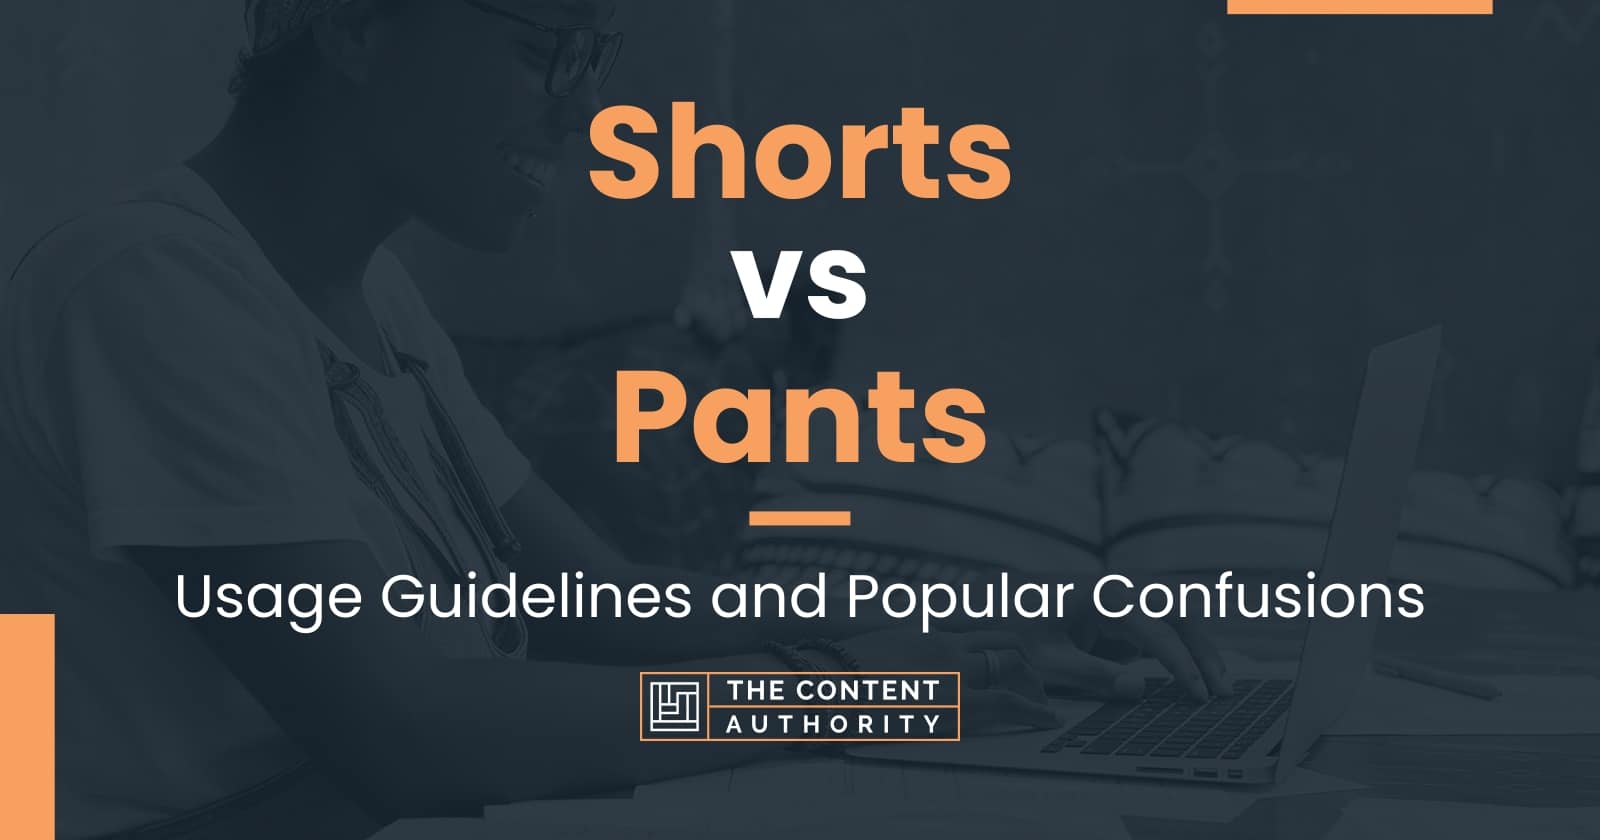 Whats the difference between pants and shorts  Collins Dictionary  Language Blog